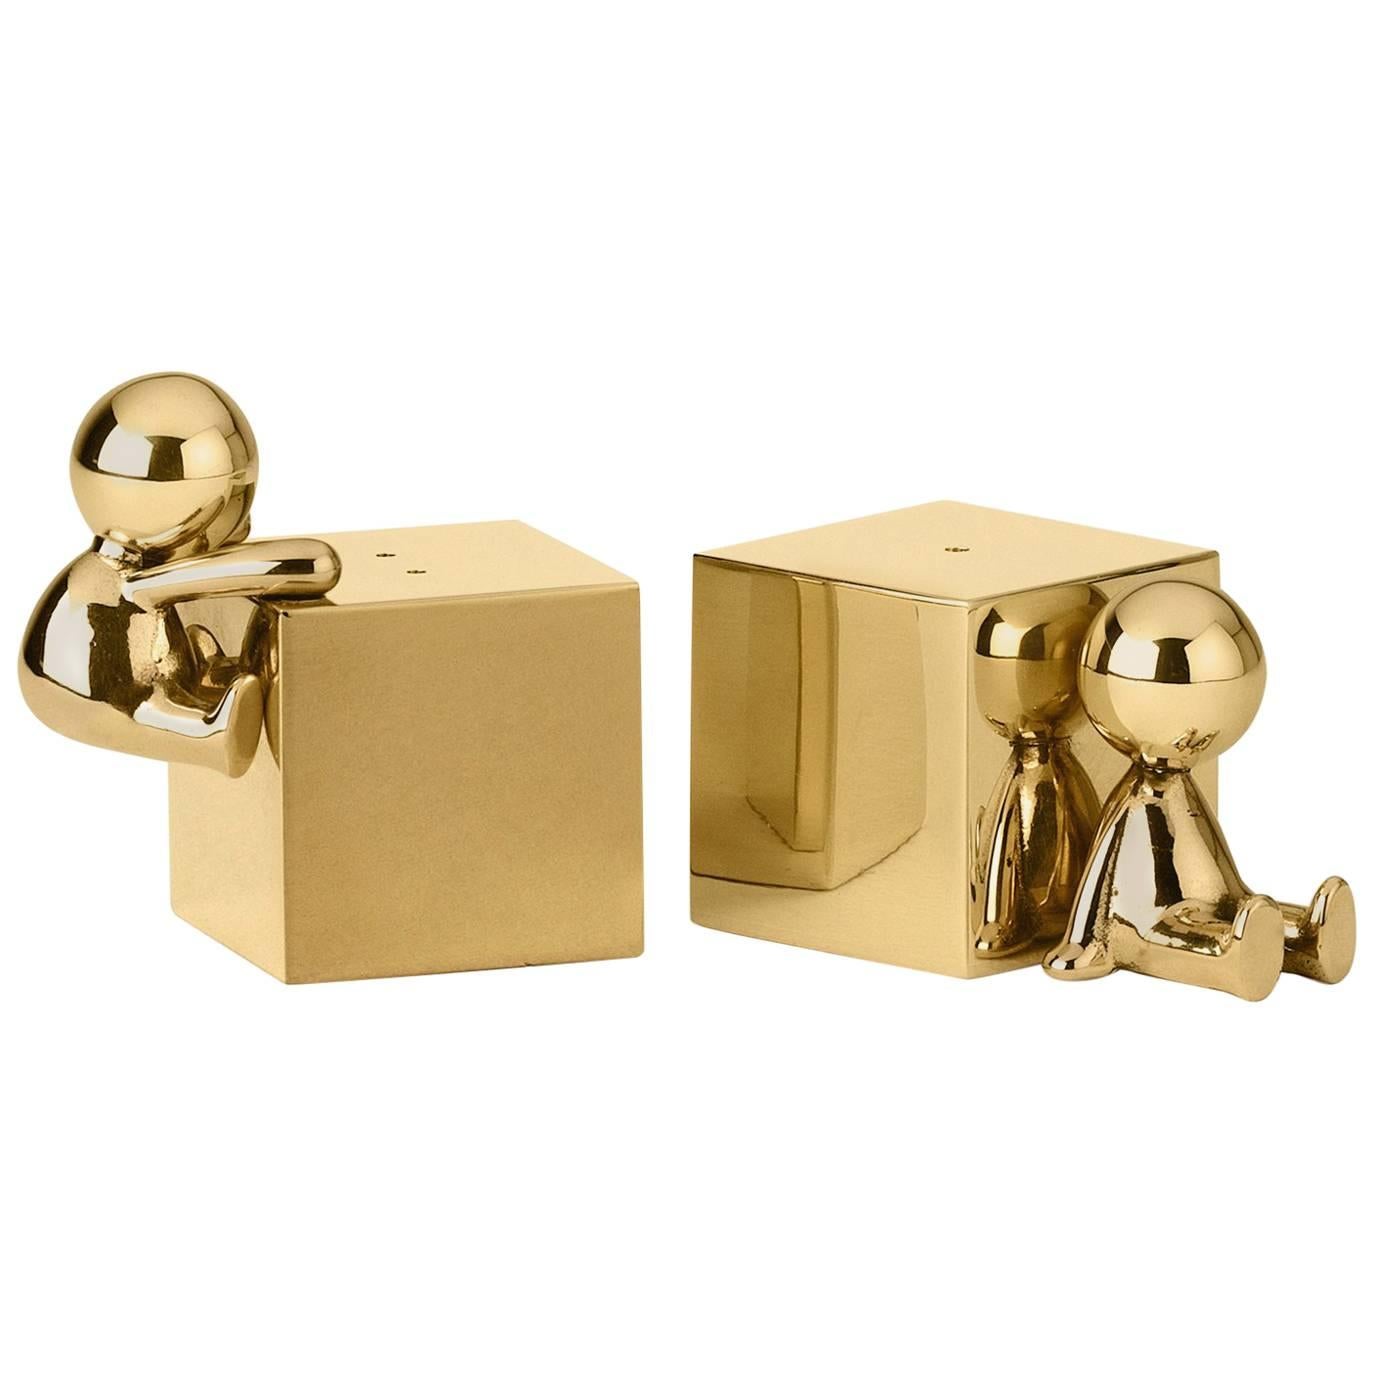 Ghidini 1961 Omini Salt and Pepper Shakers in Polished Brass For Sale